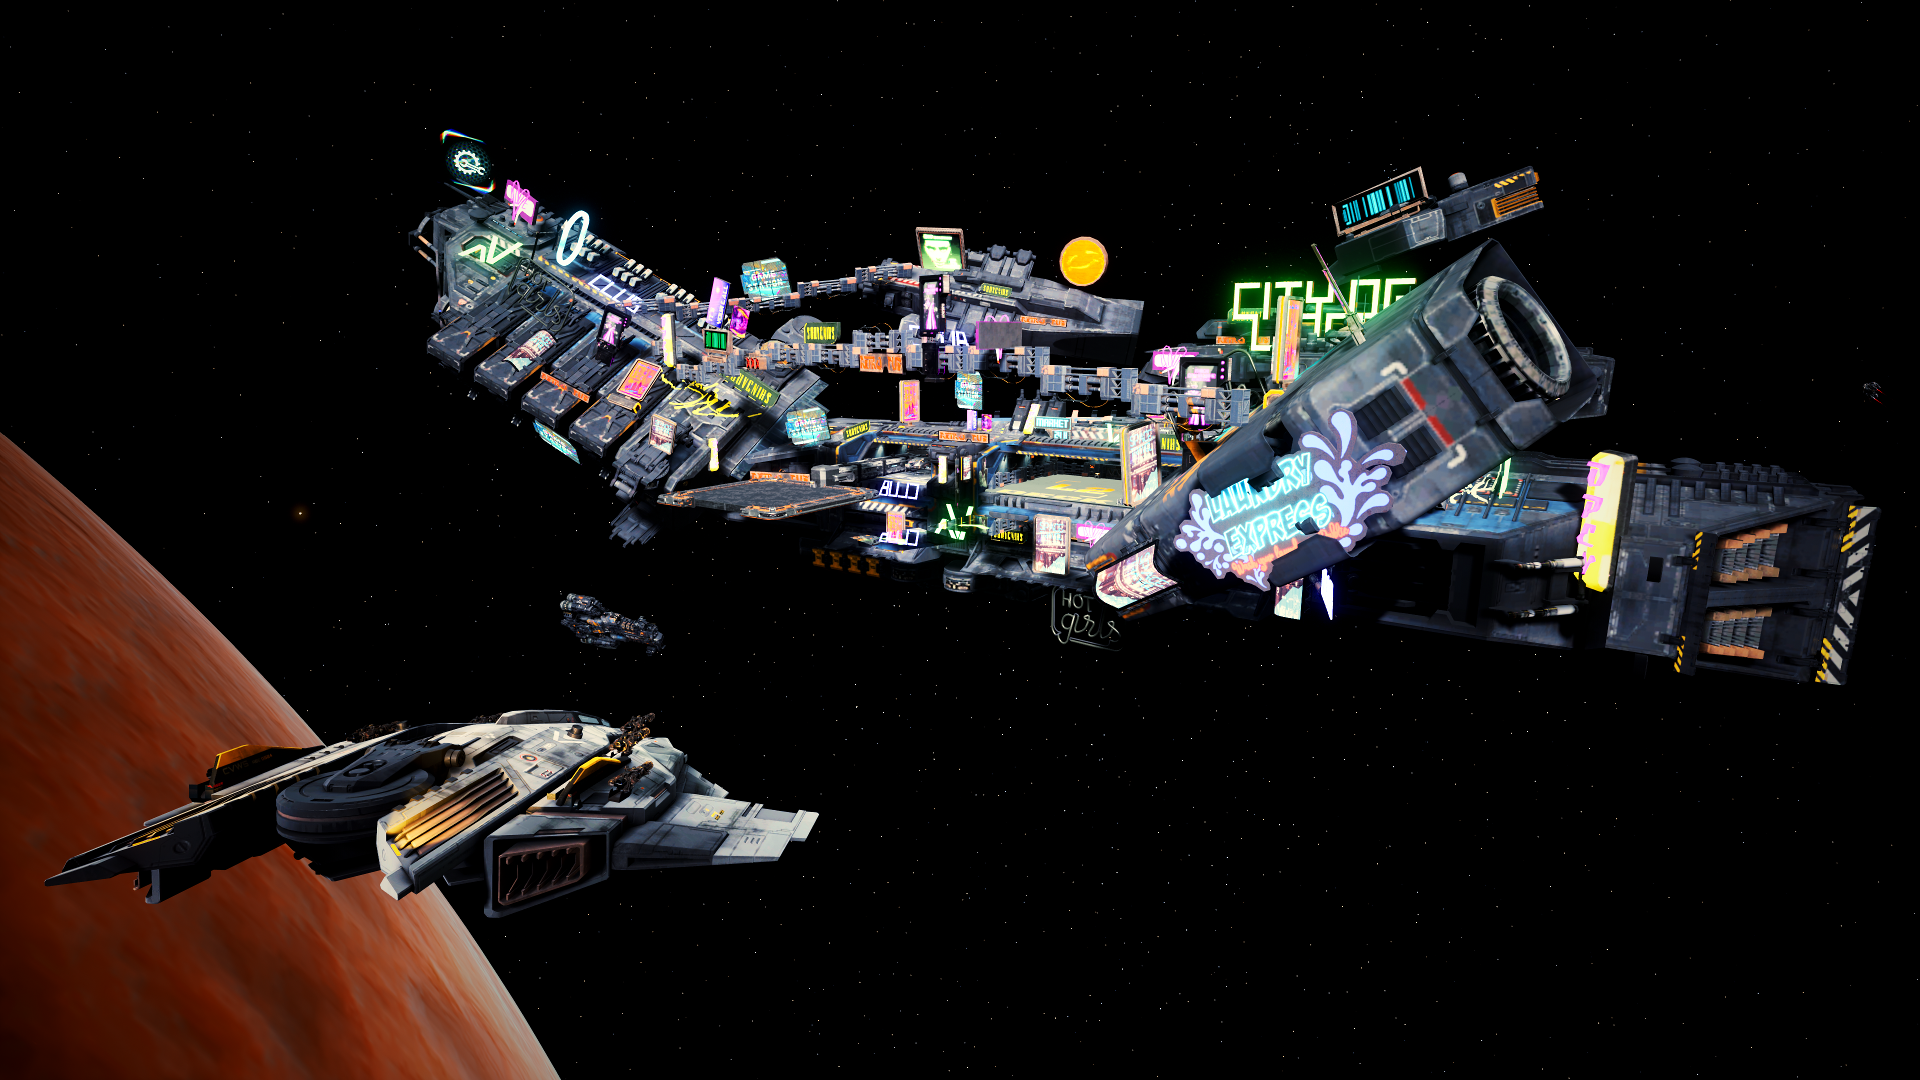 Space Space Simulator Space Station Spaceship Spacestation PC Gaming Space Shuttle Stars Planet 1920x1080